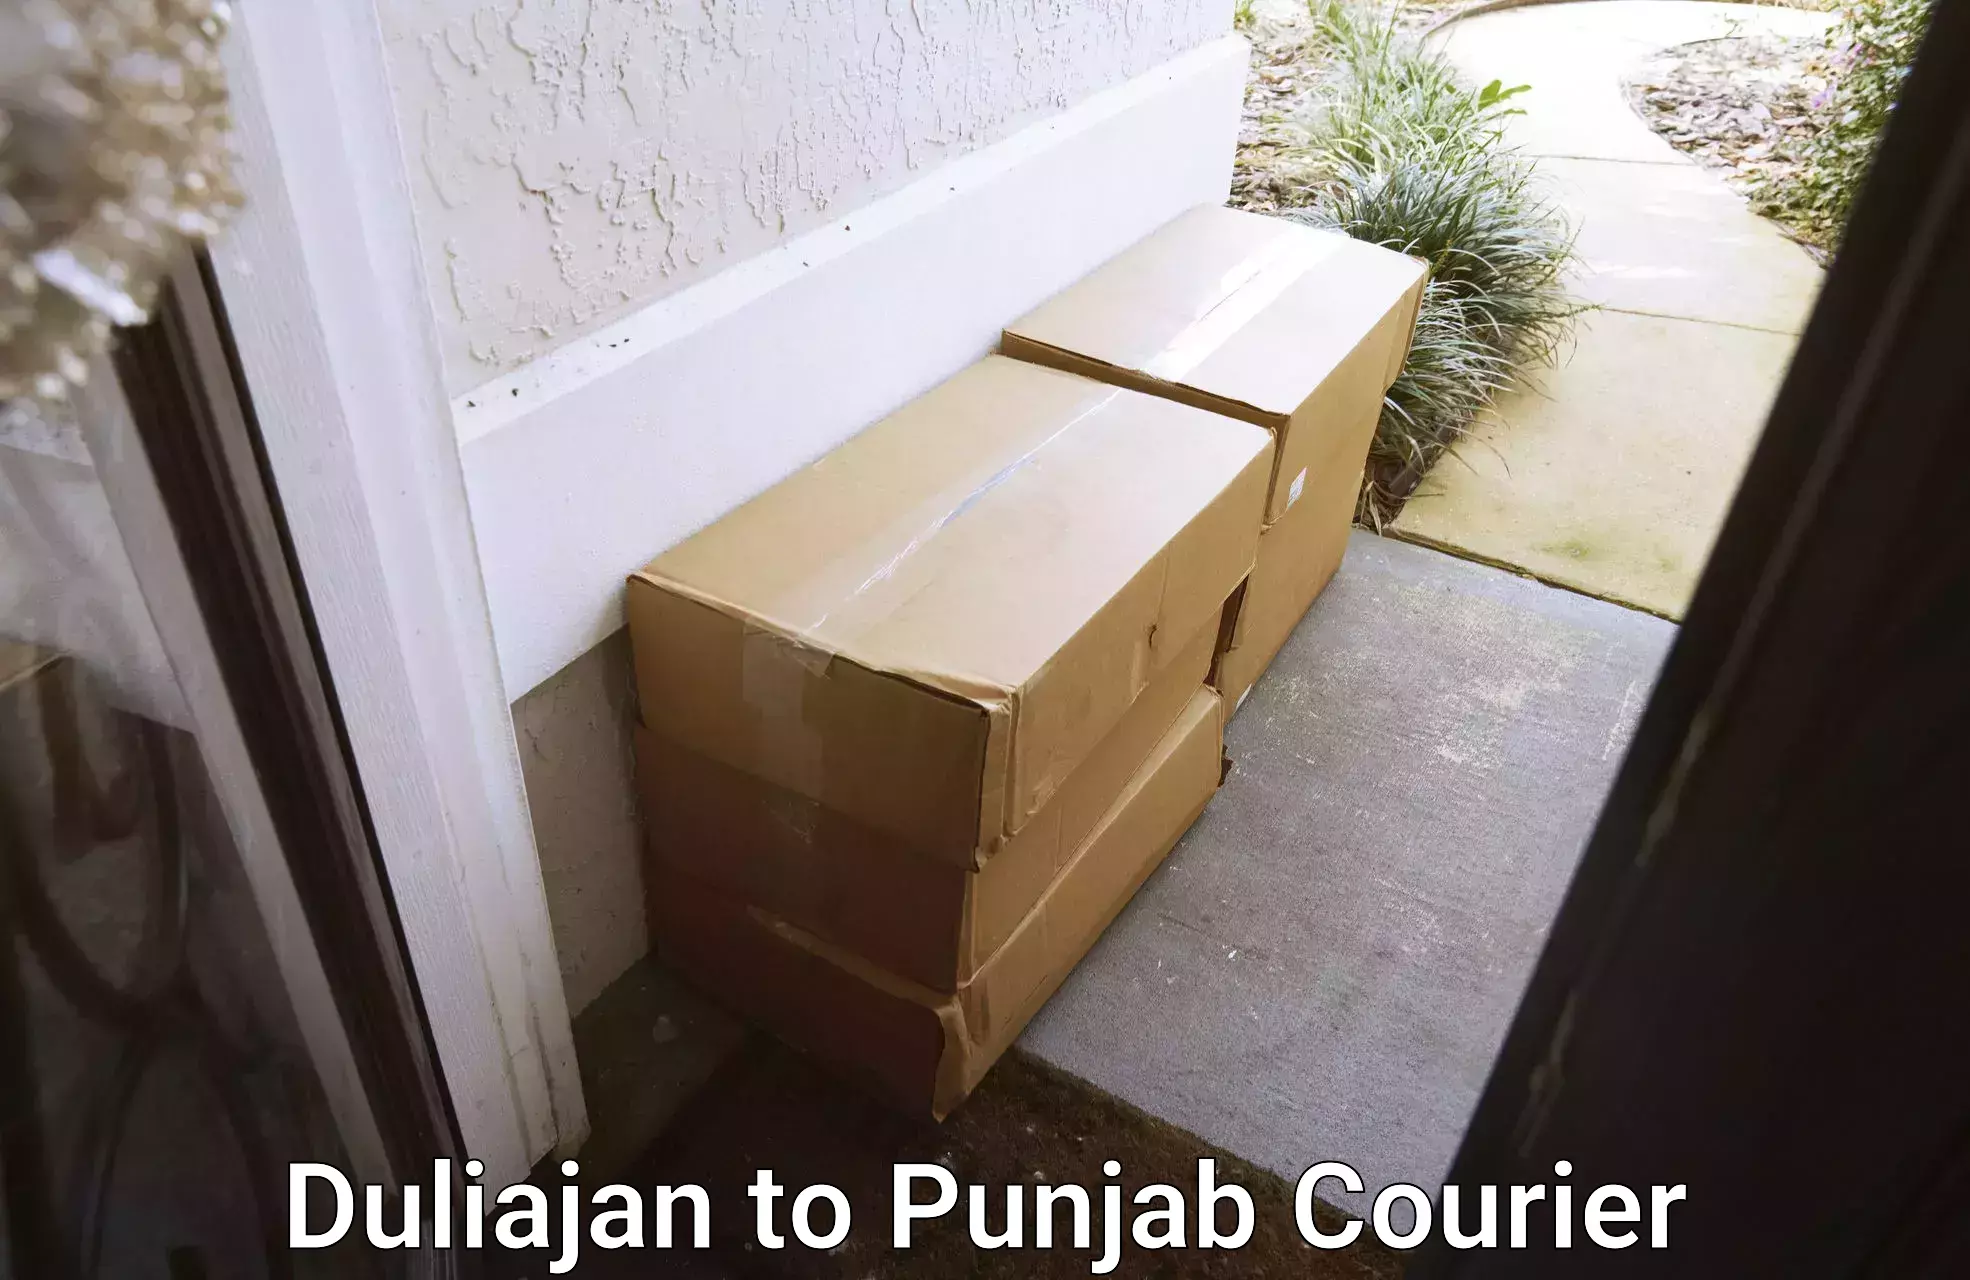 State-of-the-art courier technology Duliajan to Punjab